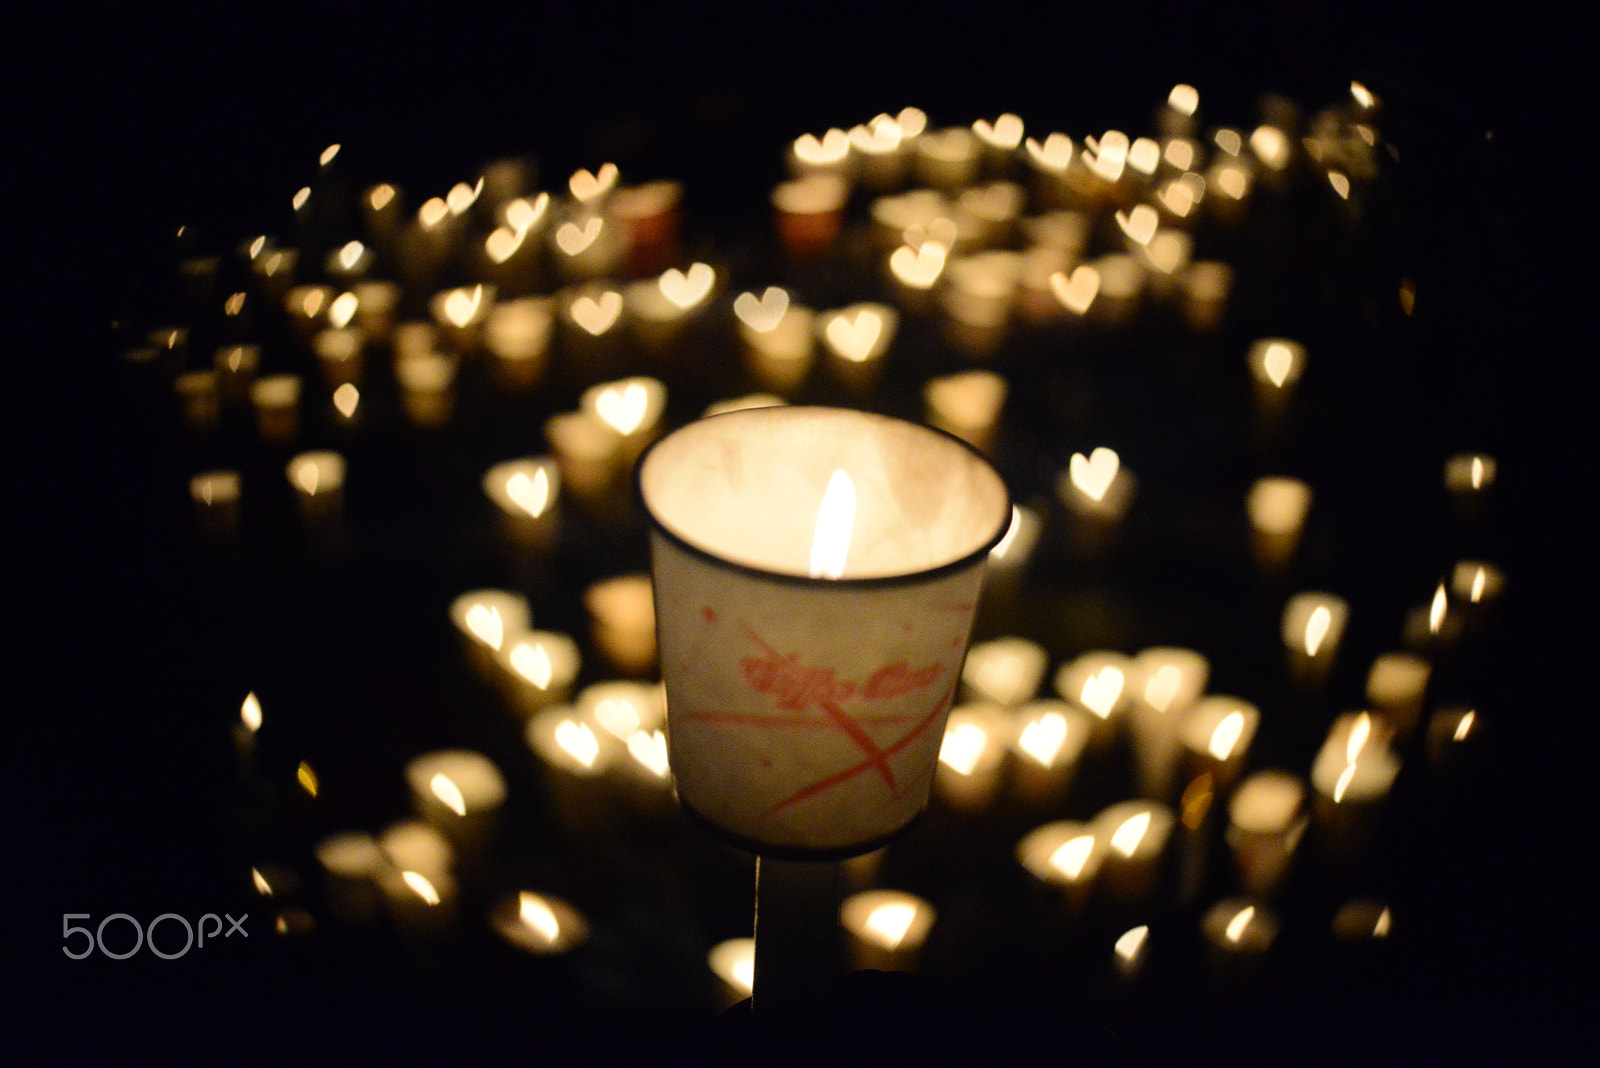 Nikon D800 sample photo. Candlelight vigils to be sublimated into love photography